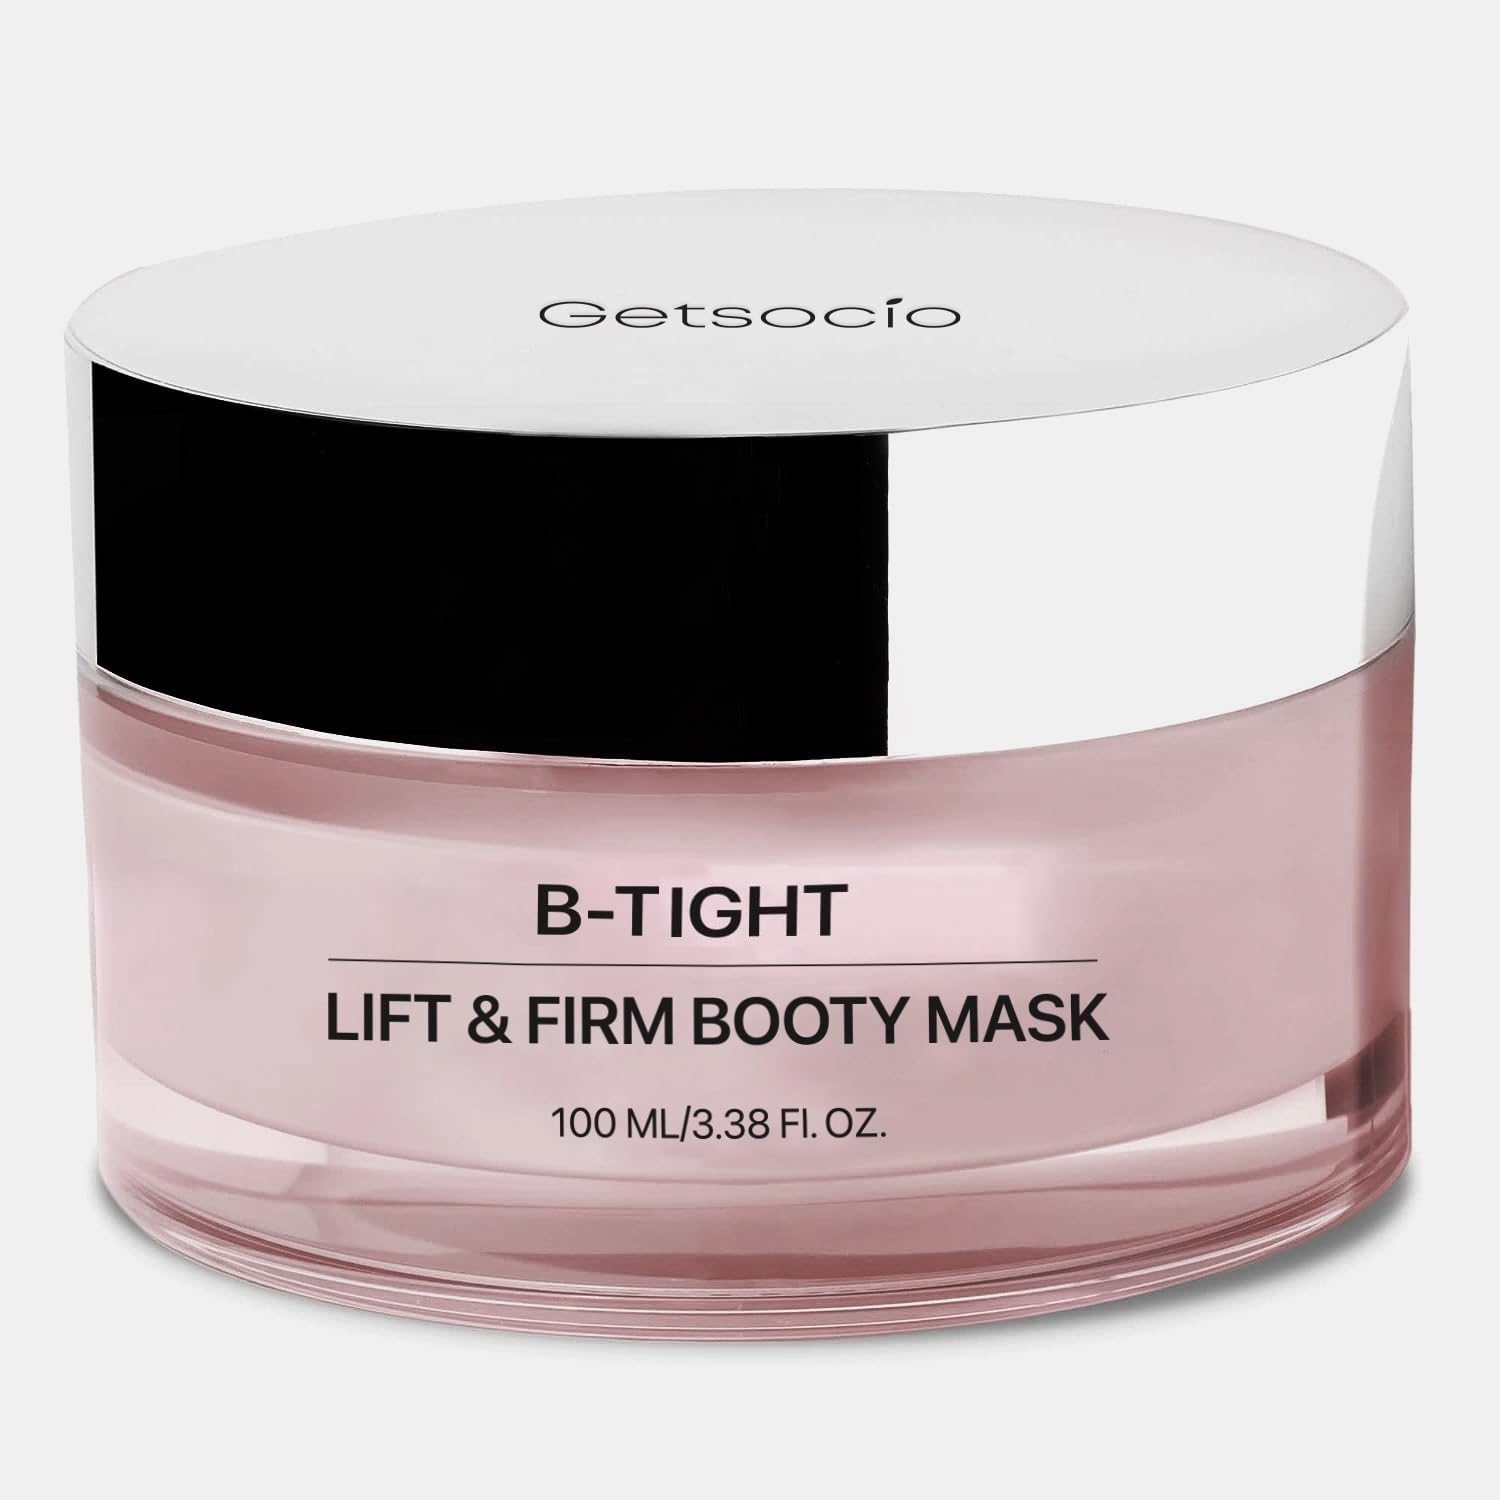 Getsocio B-Tight Lift & Firm Booty Mask